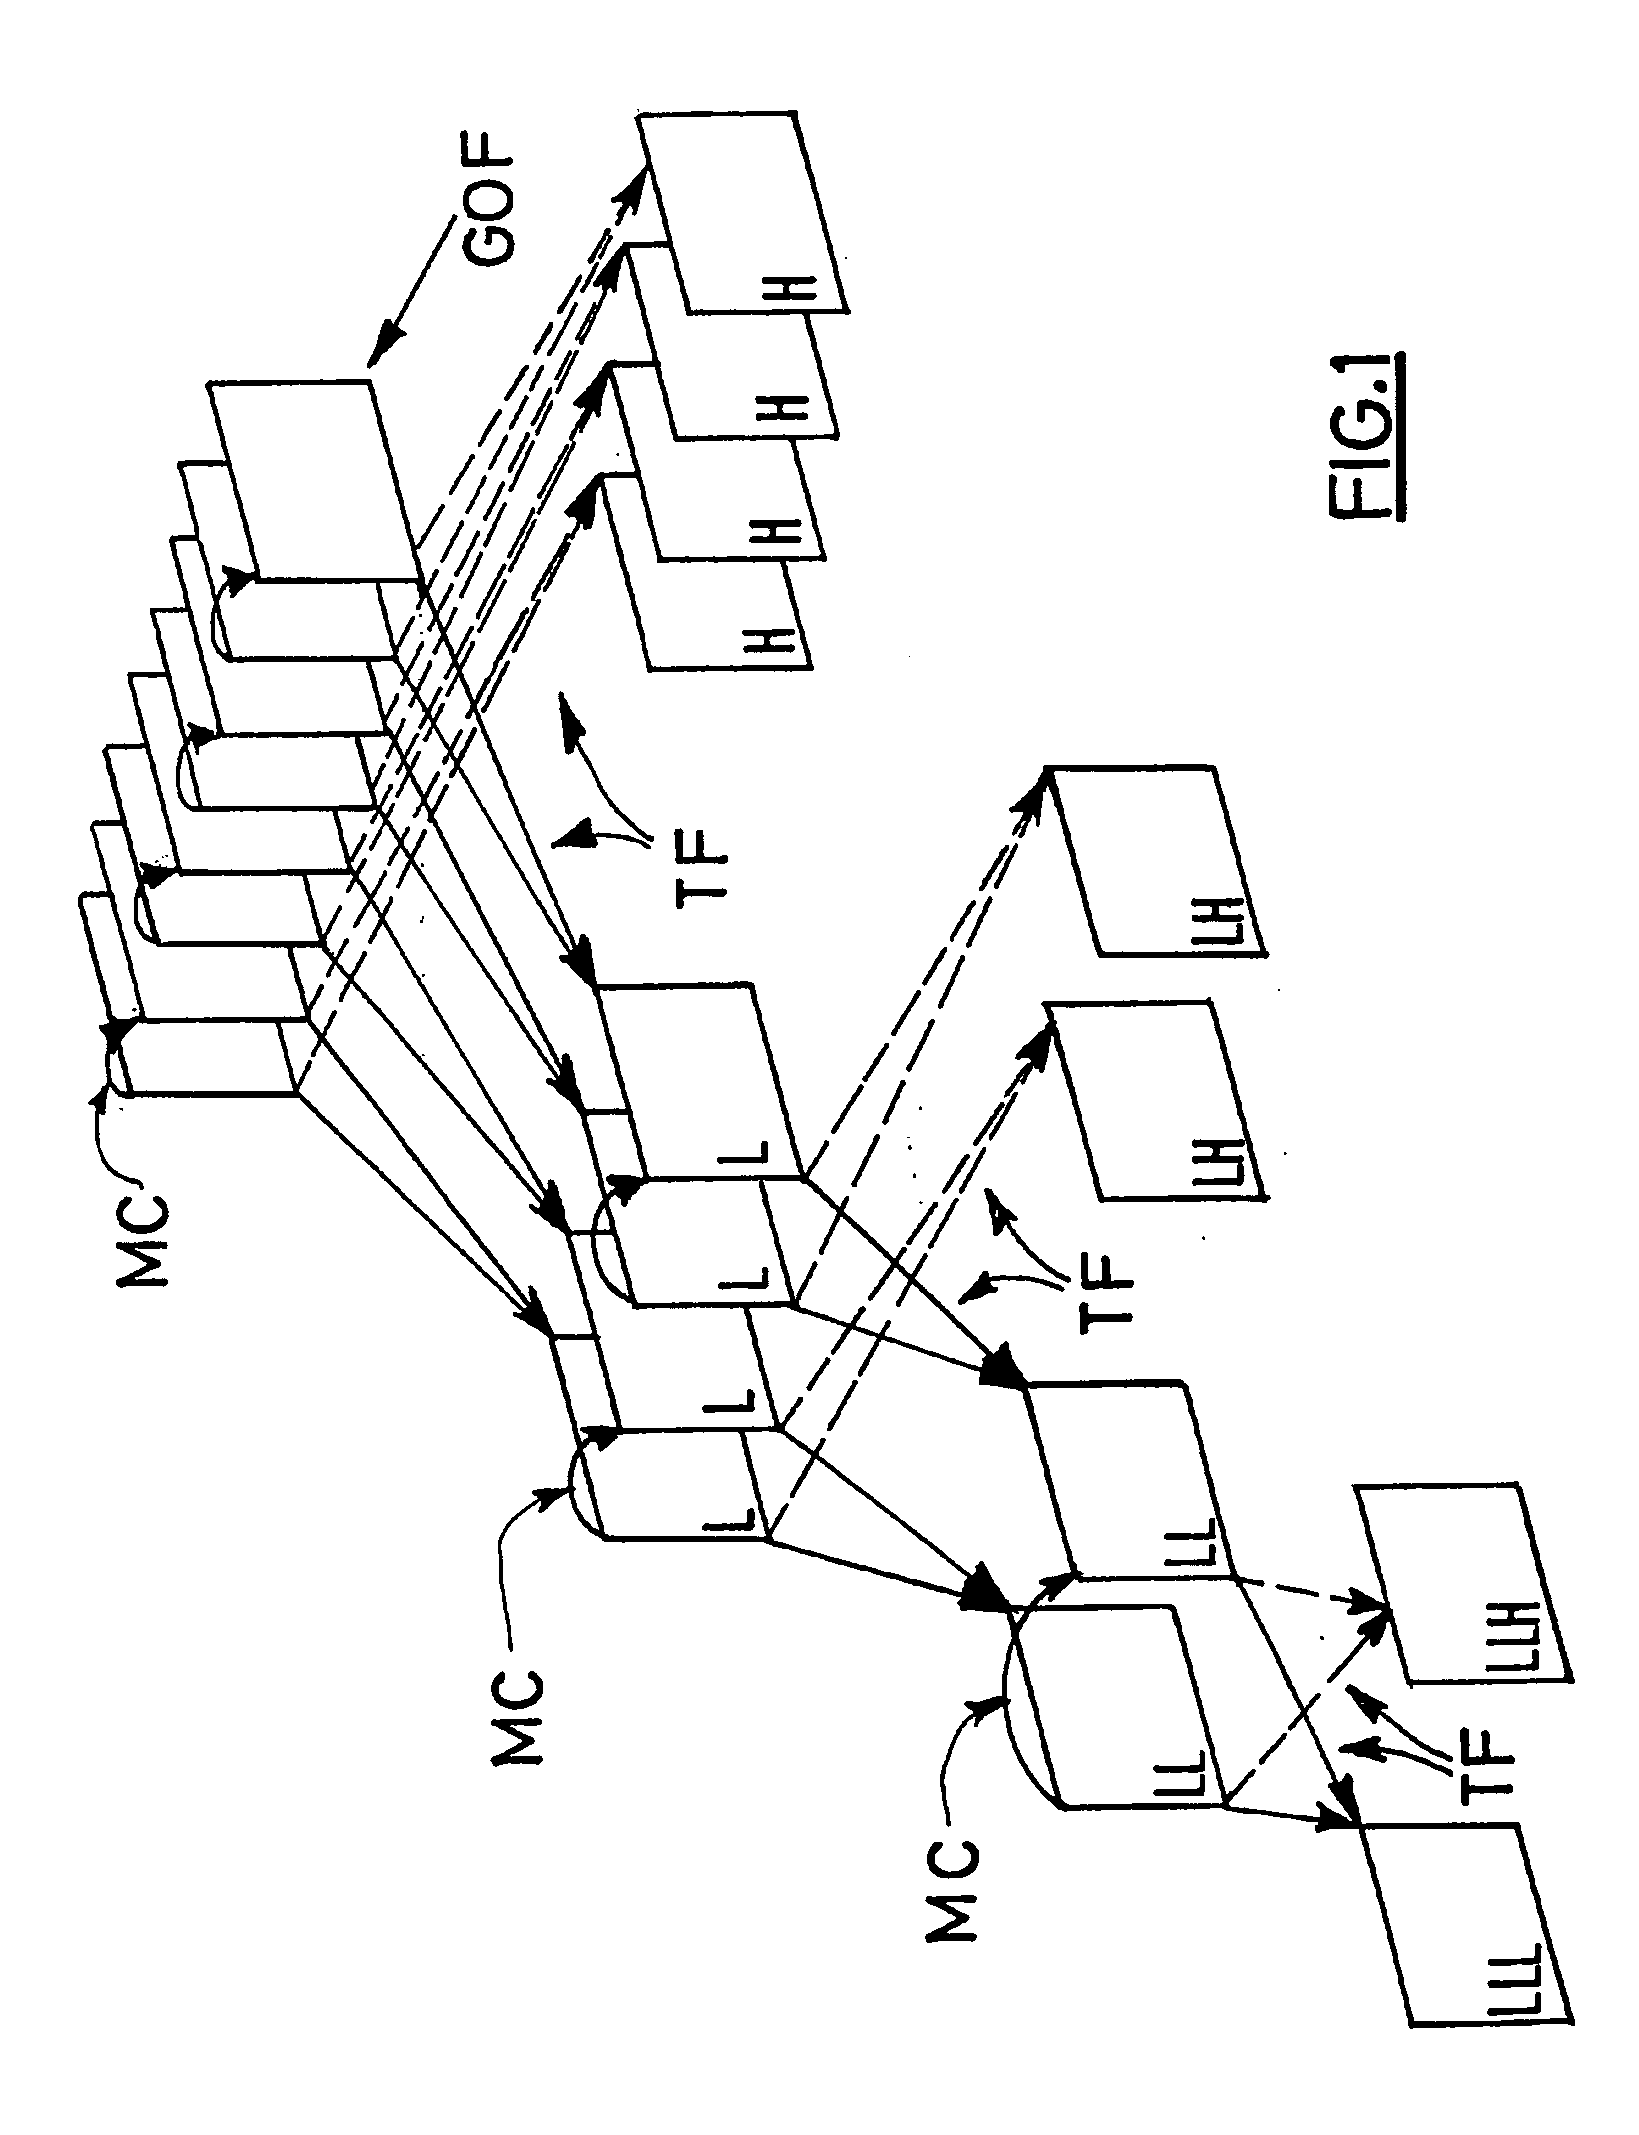 Drift-free video encoding and decoding method and corresponding devices